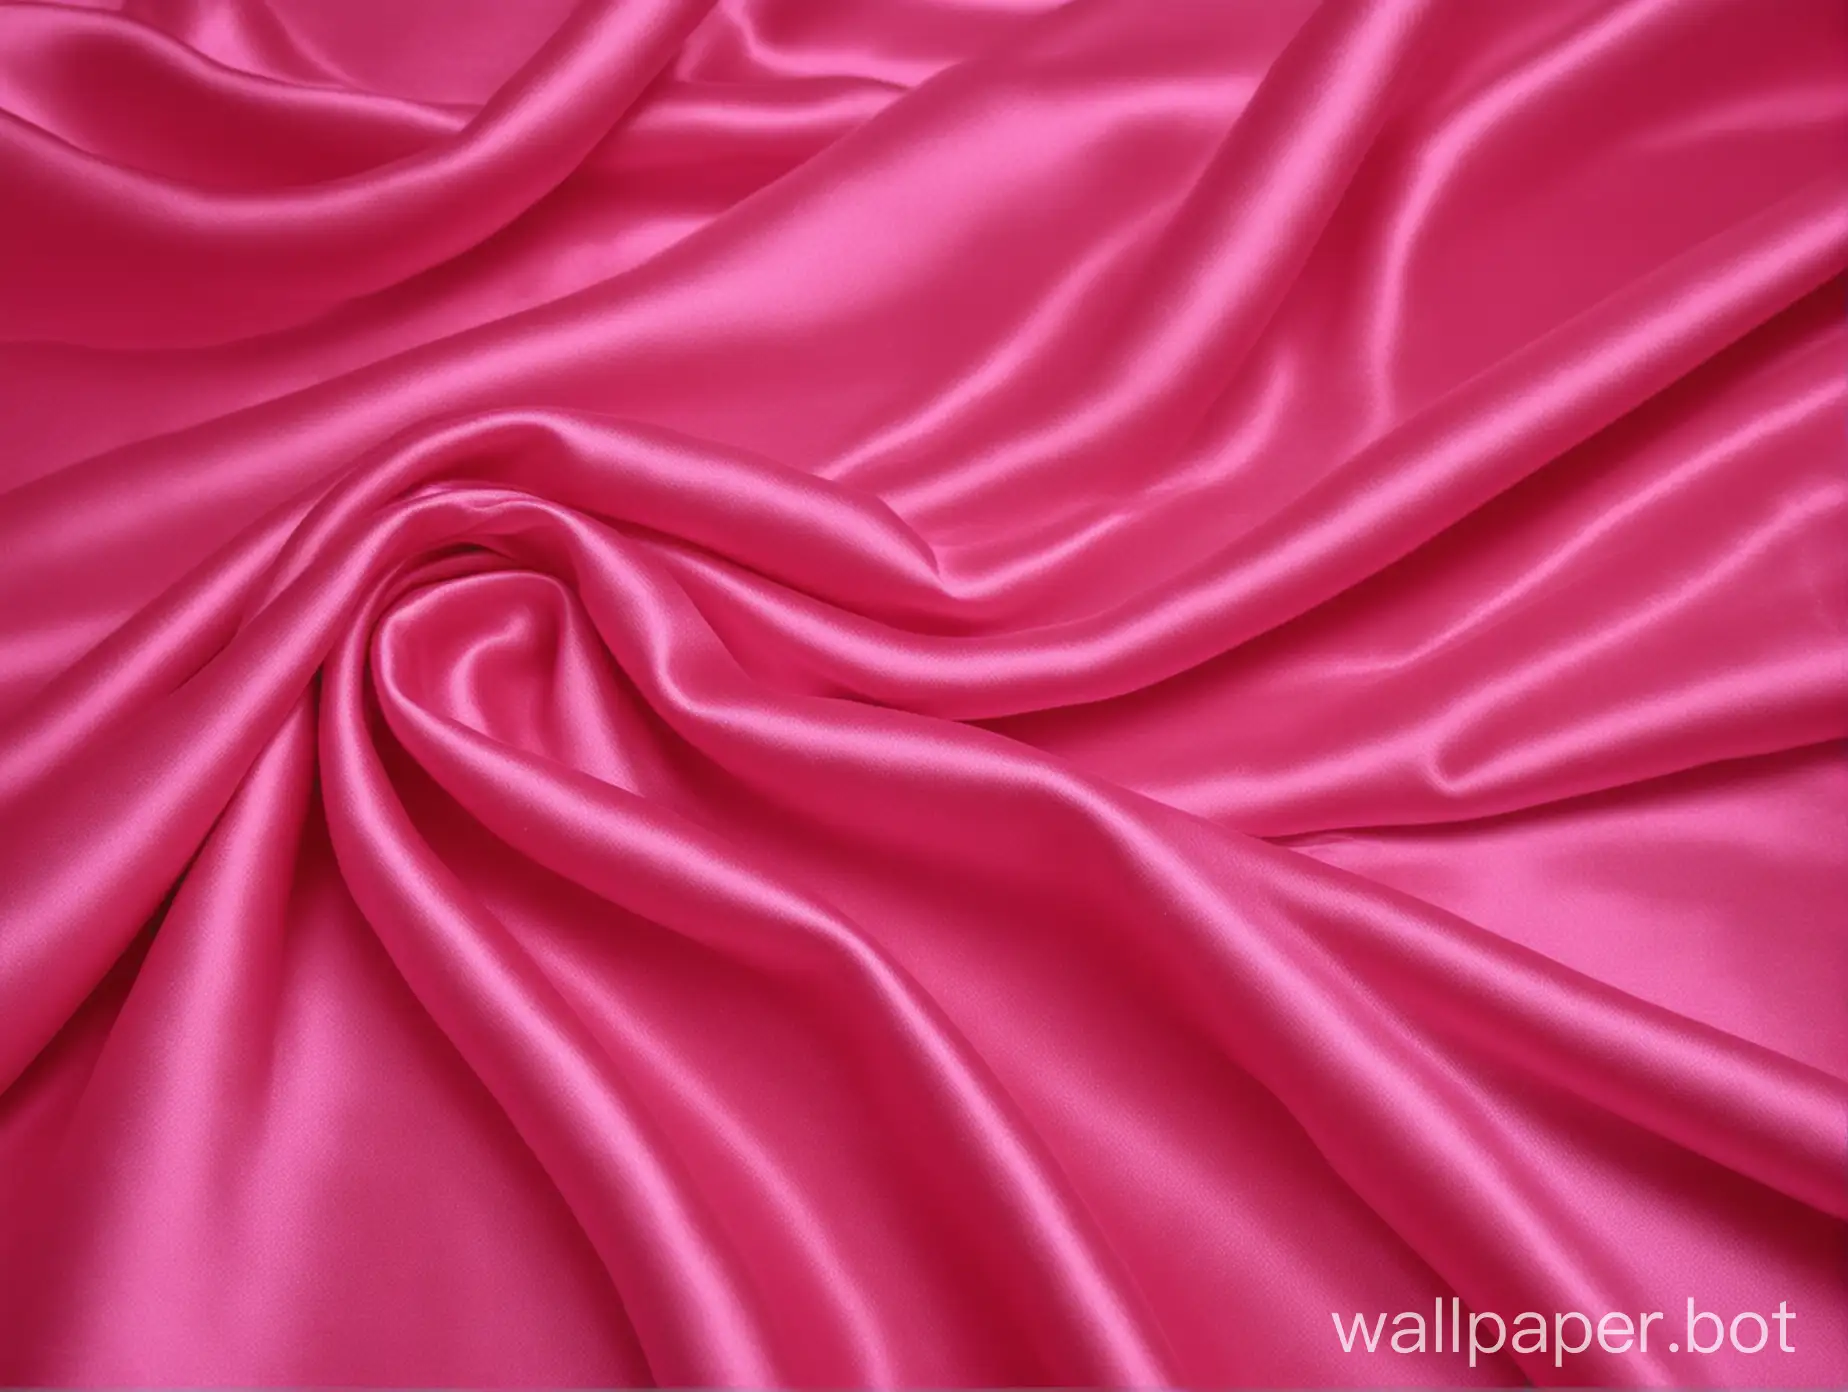 Opulent-Bed-in-Gentle-Hot-Pink-Fuchsia-Liquid-Mulberry-Silk-Charmeuse-Fabric